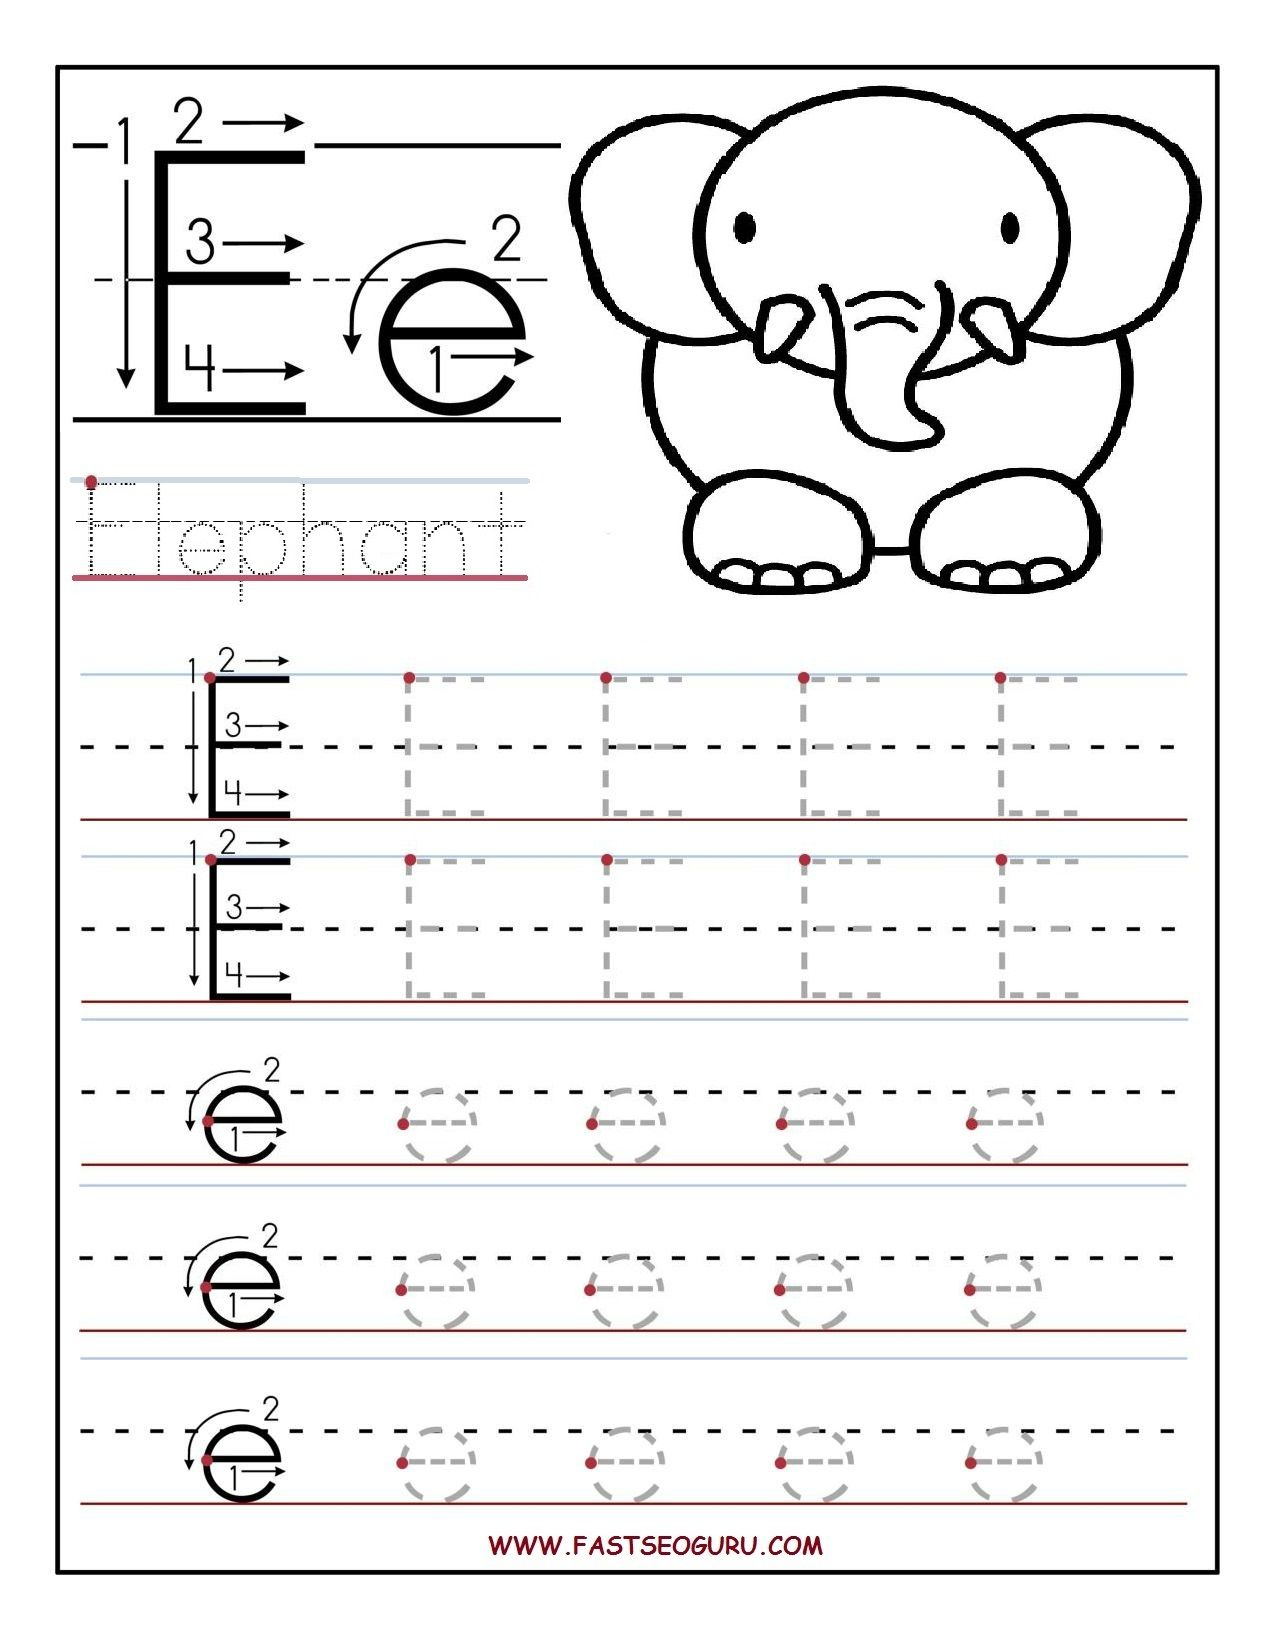 Pinvilfran Gason On Decor | Letter Tracing Worksheets with Letter E Worksheets For Preschool